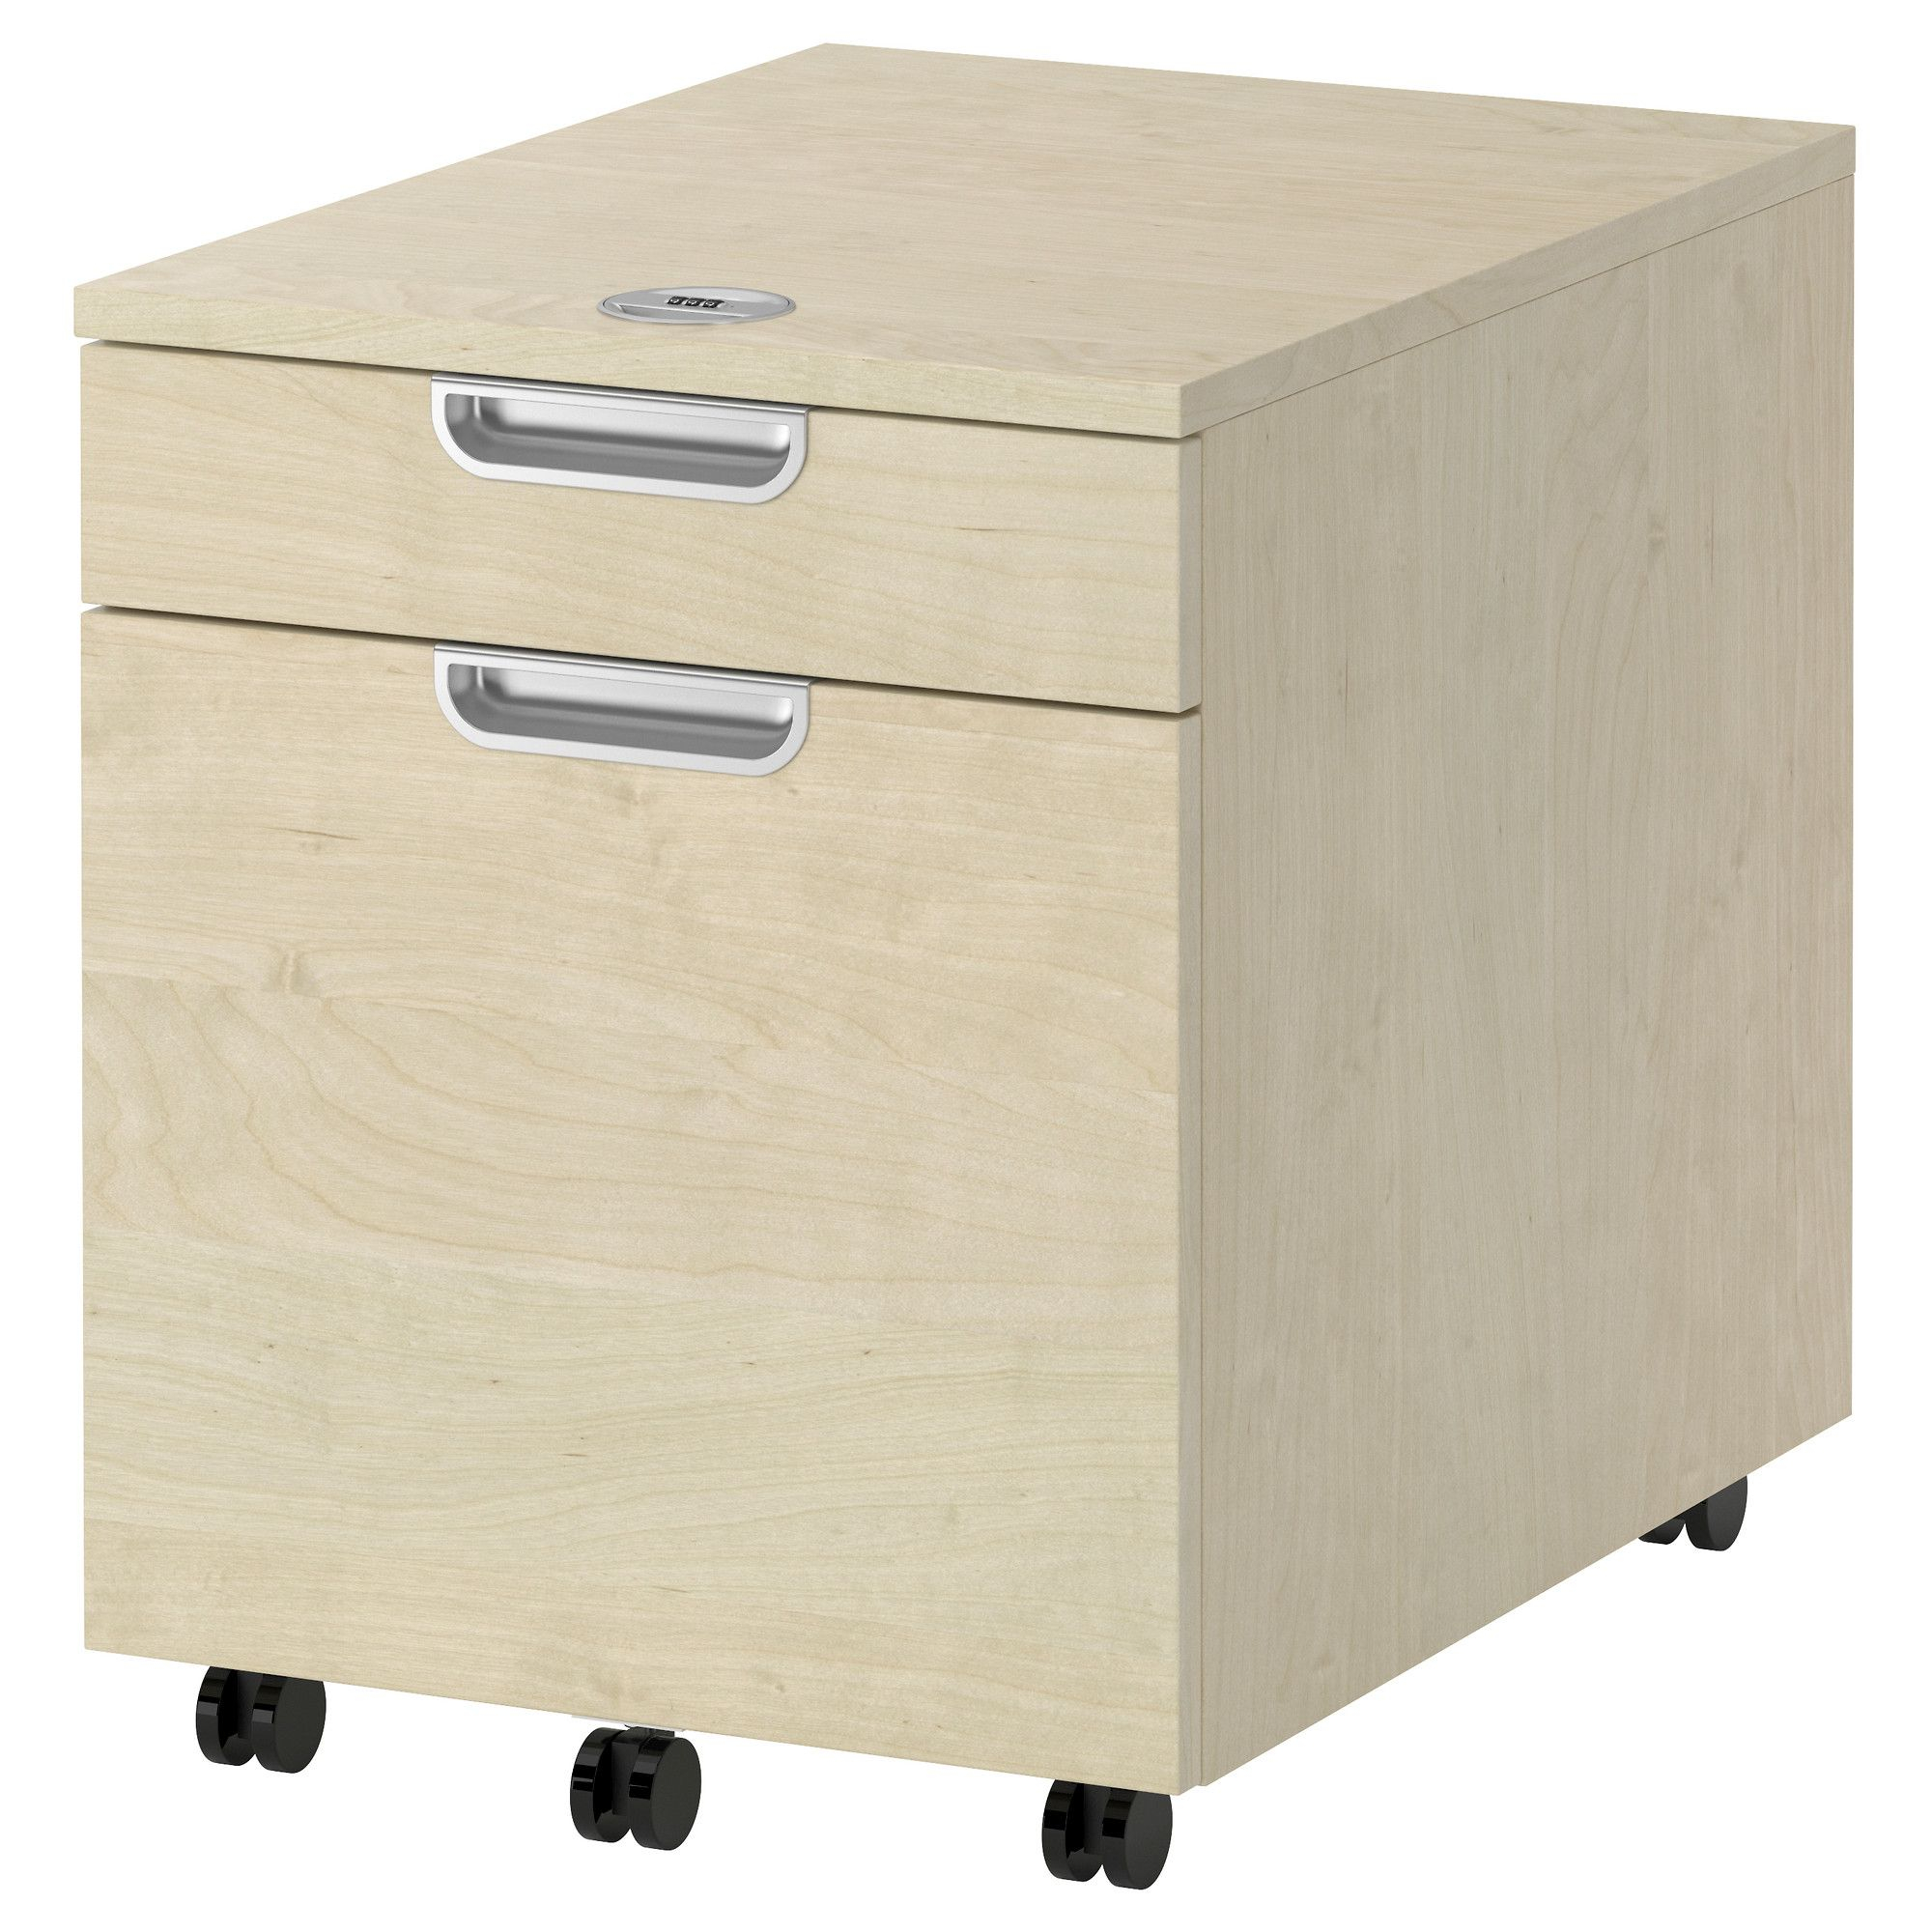 Furniture And Home Furnishings Kens Office Space Filing Cabinet in size 2000 X 2000